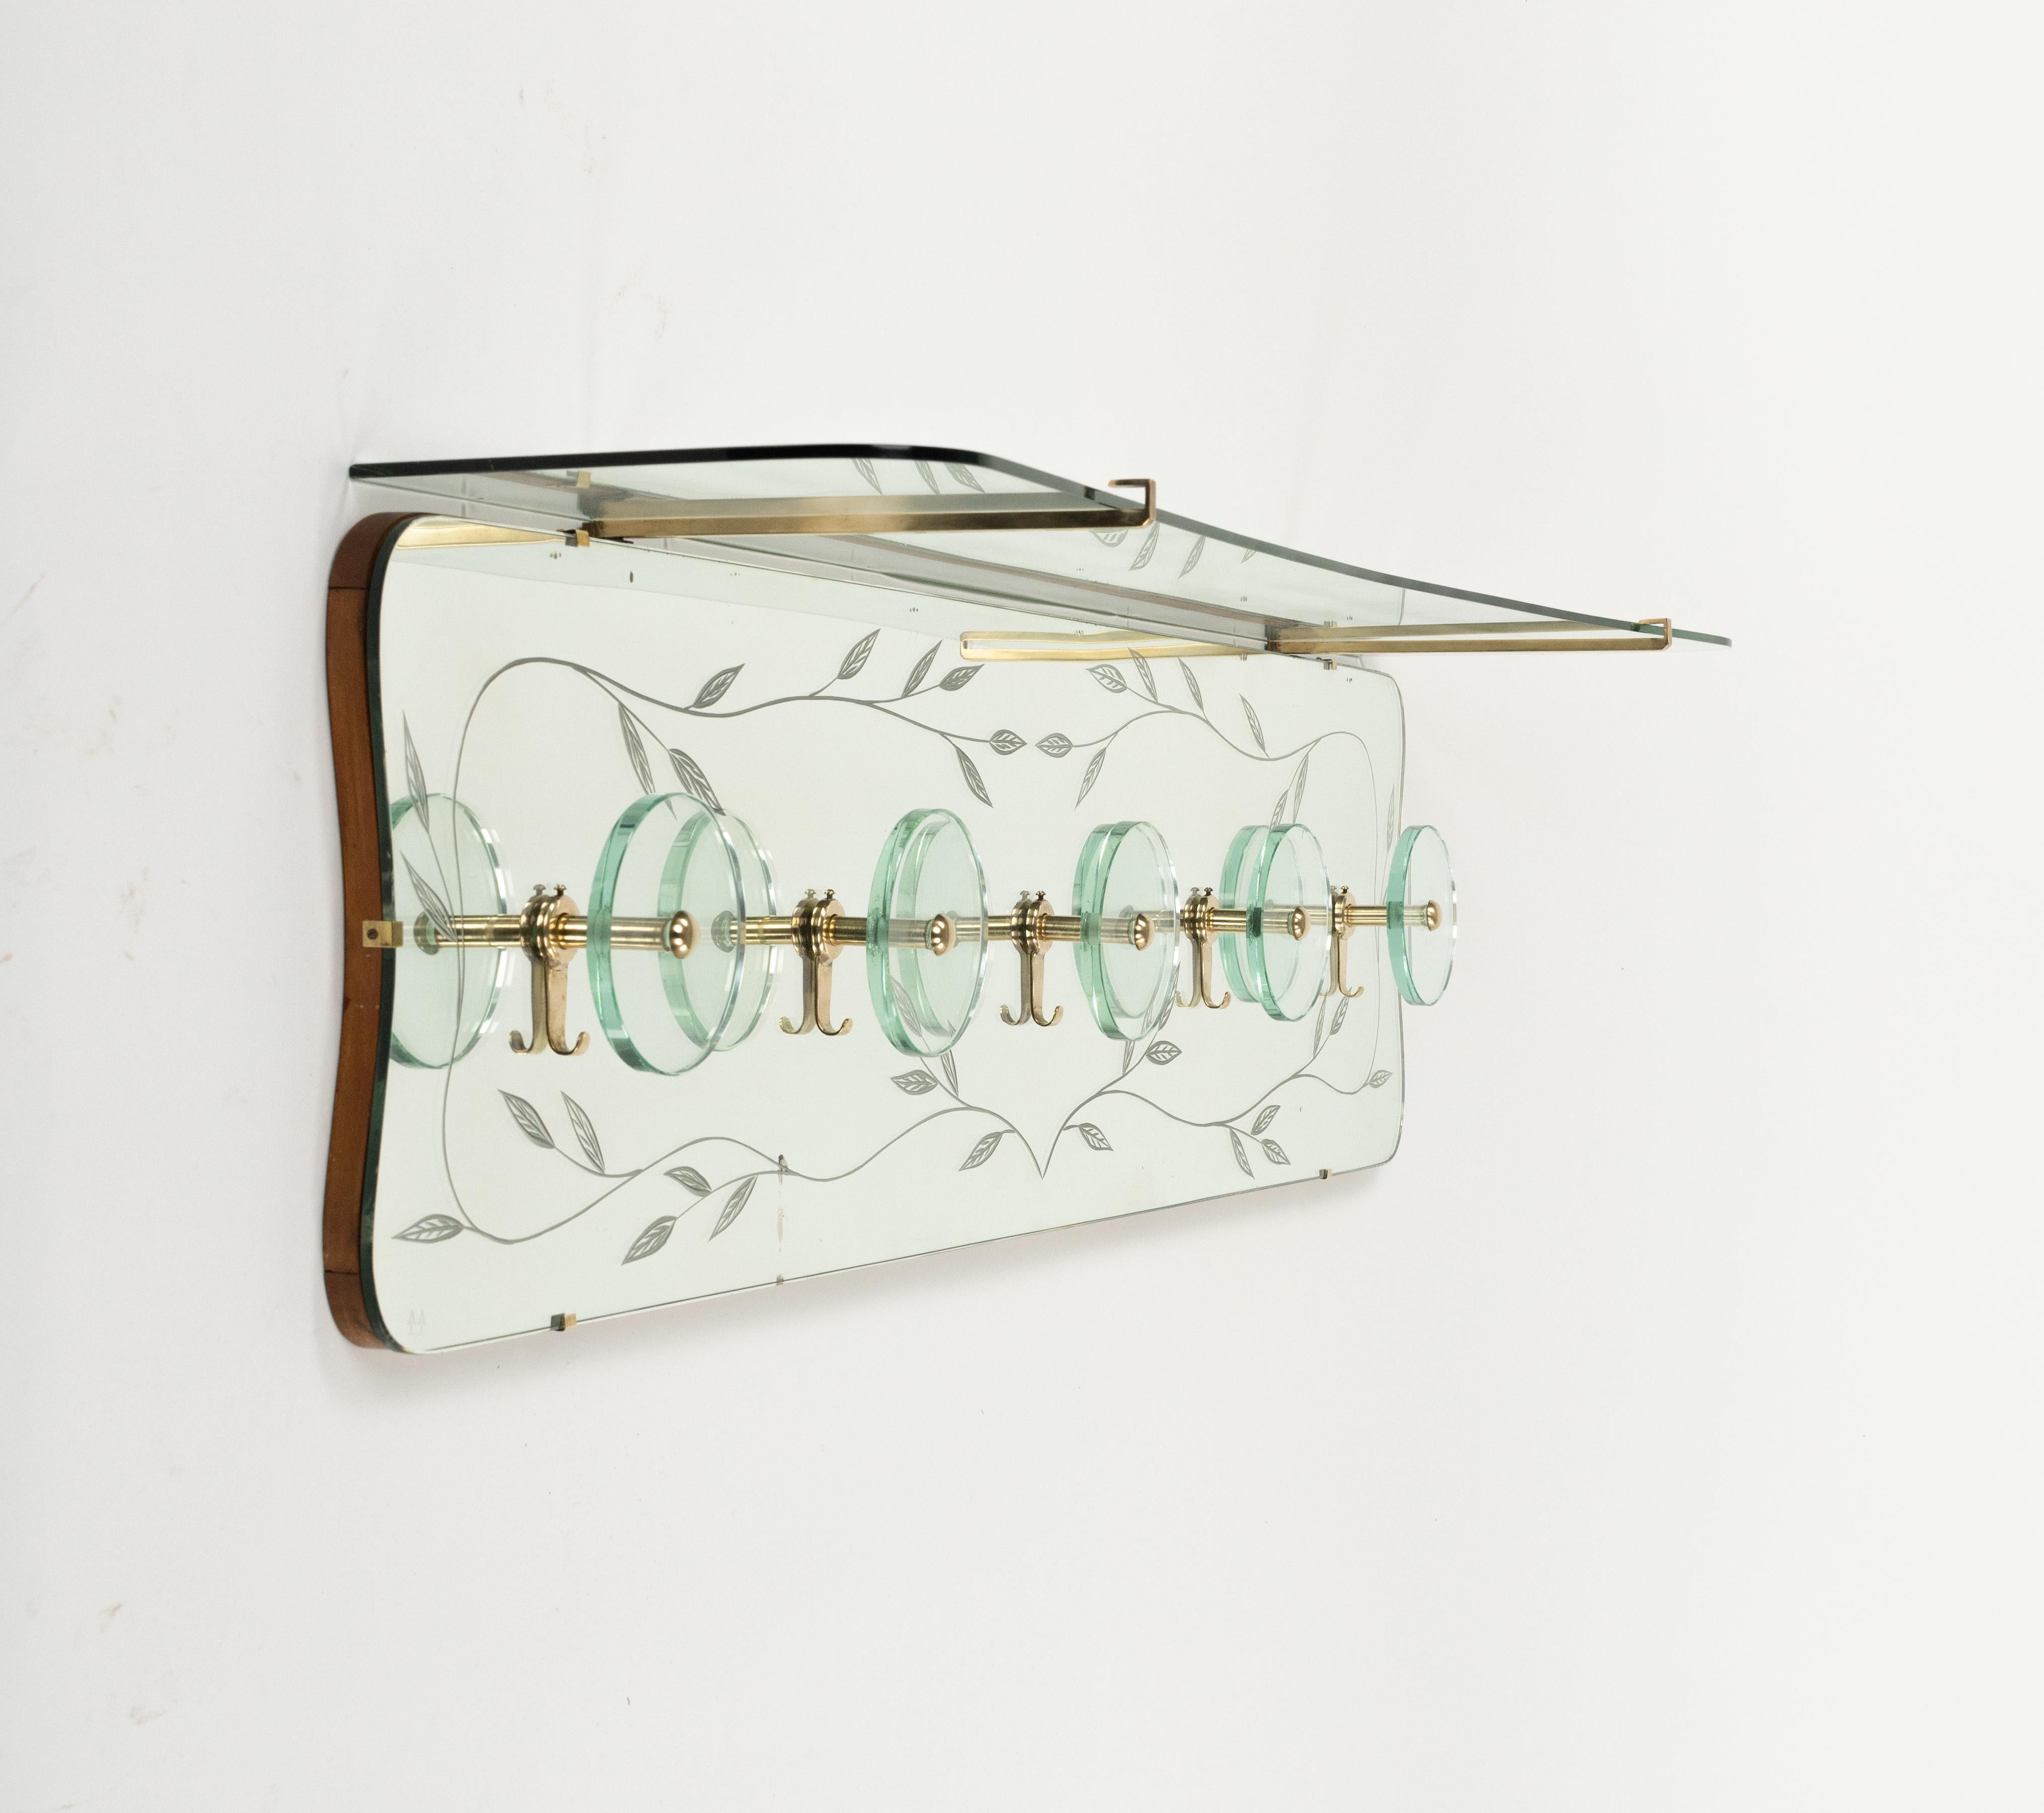 Midcentury Coat Rack Shelf in Mirror, Brass & Glass by Cristal Art, Italy, 1950s In Good Condition For Sale In Rome, IT